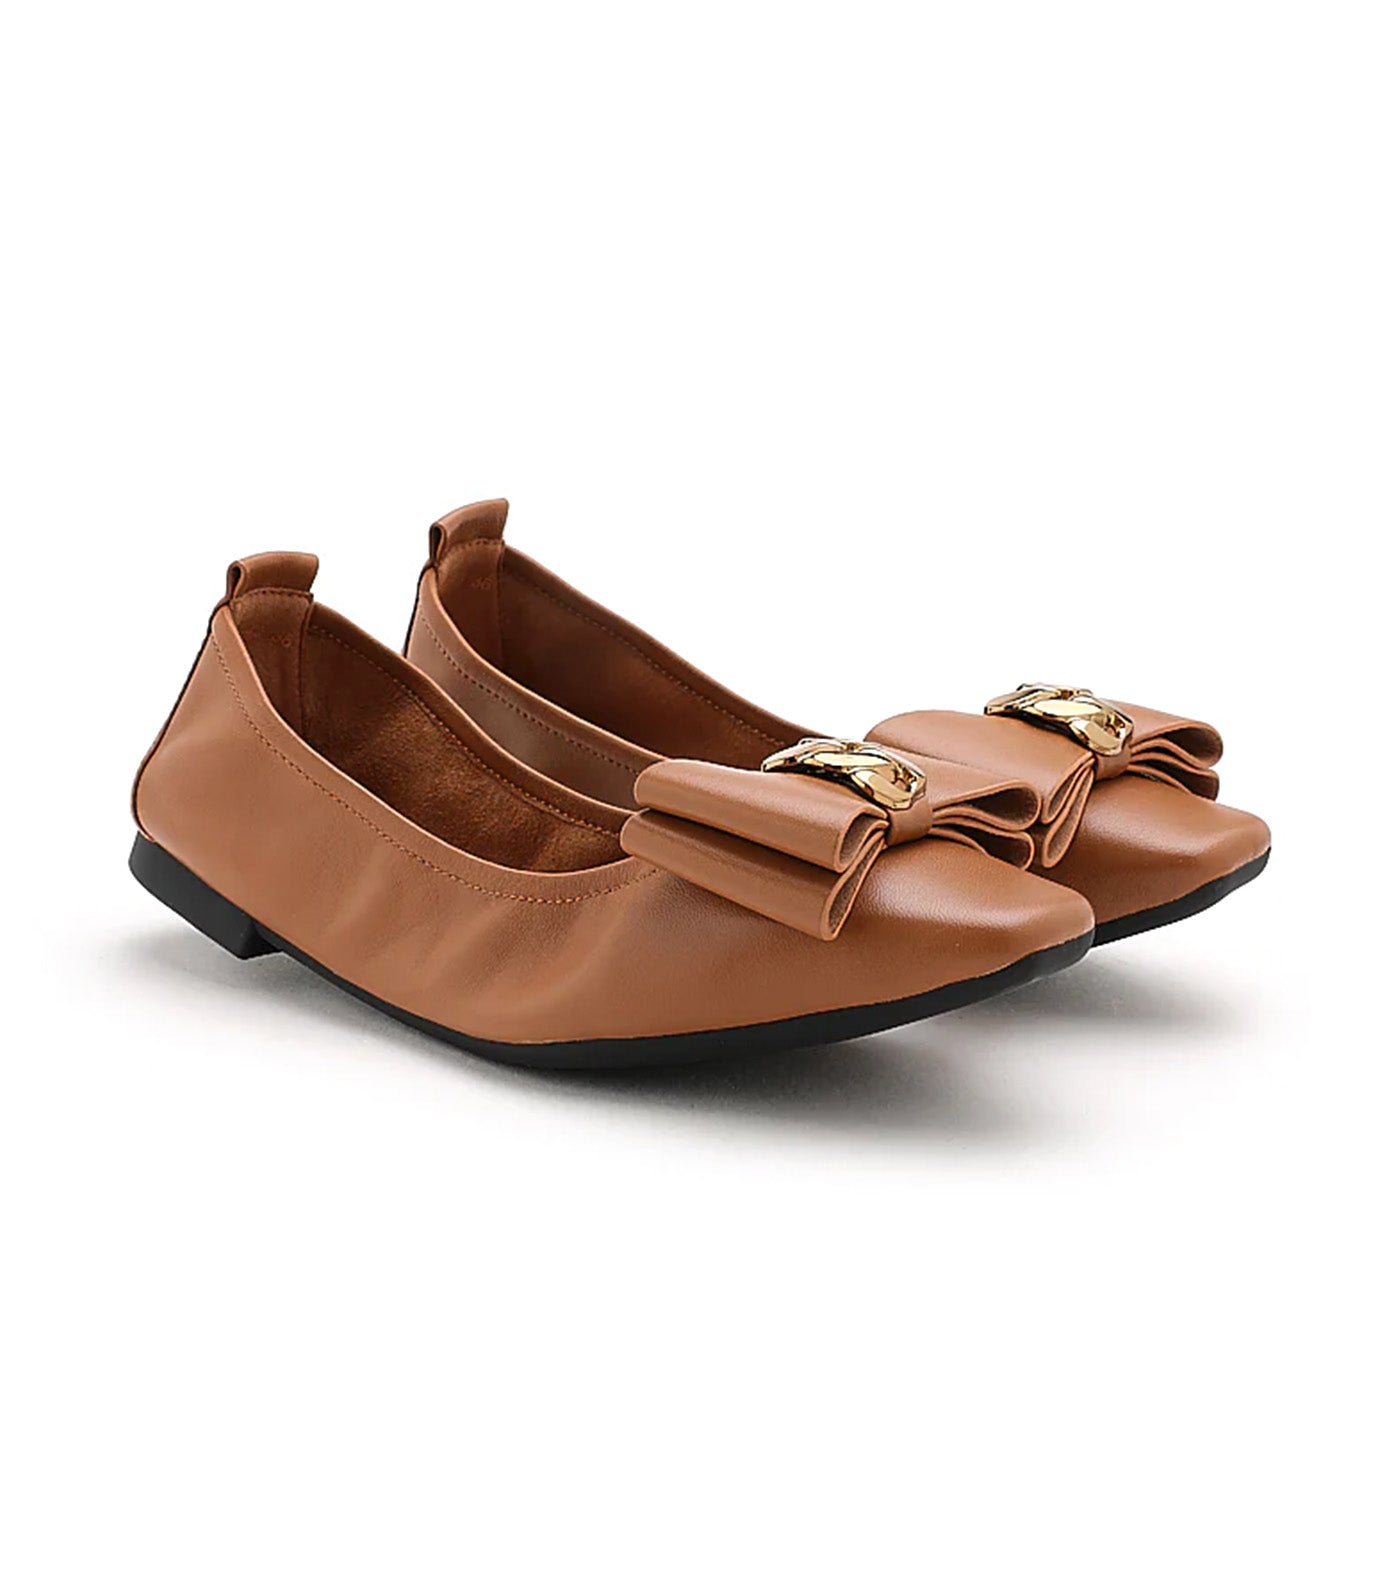 Candace Pop Of Bow Square Toe Foldable Flats Camel